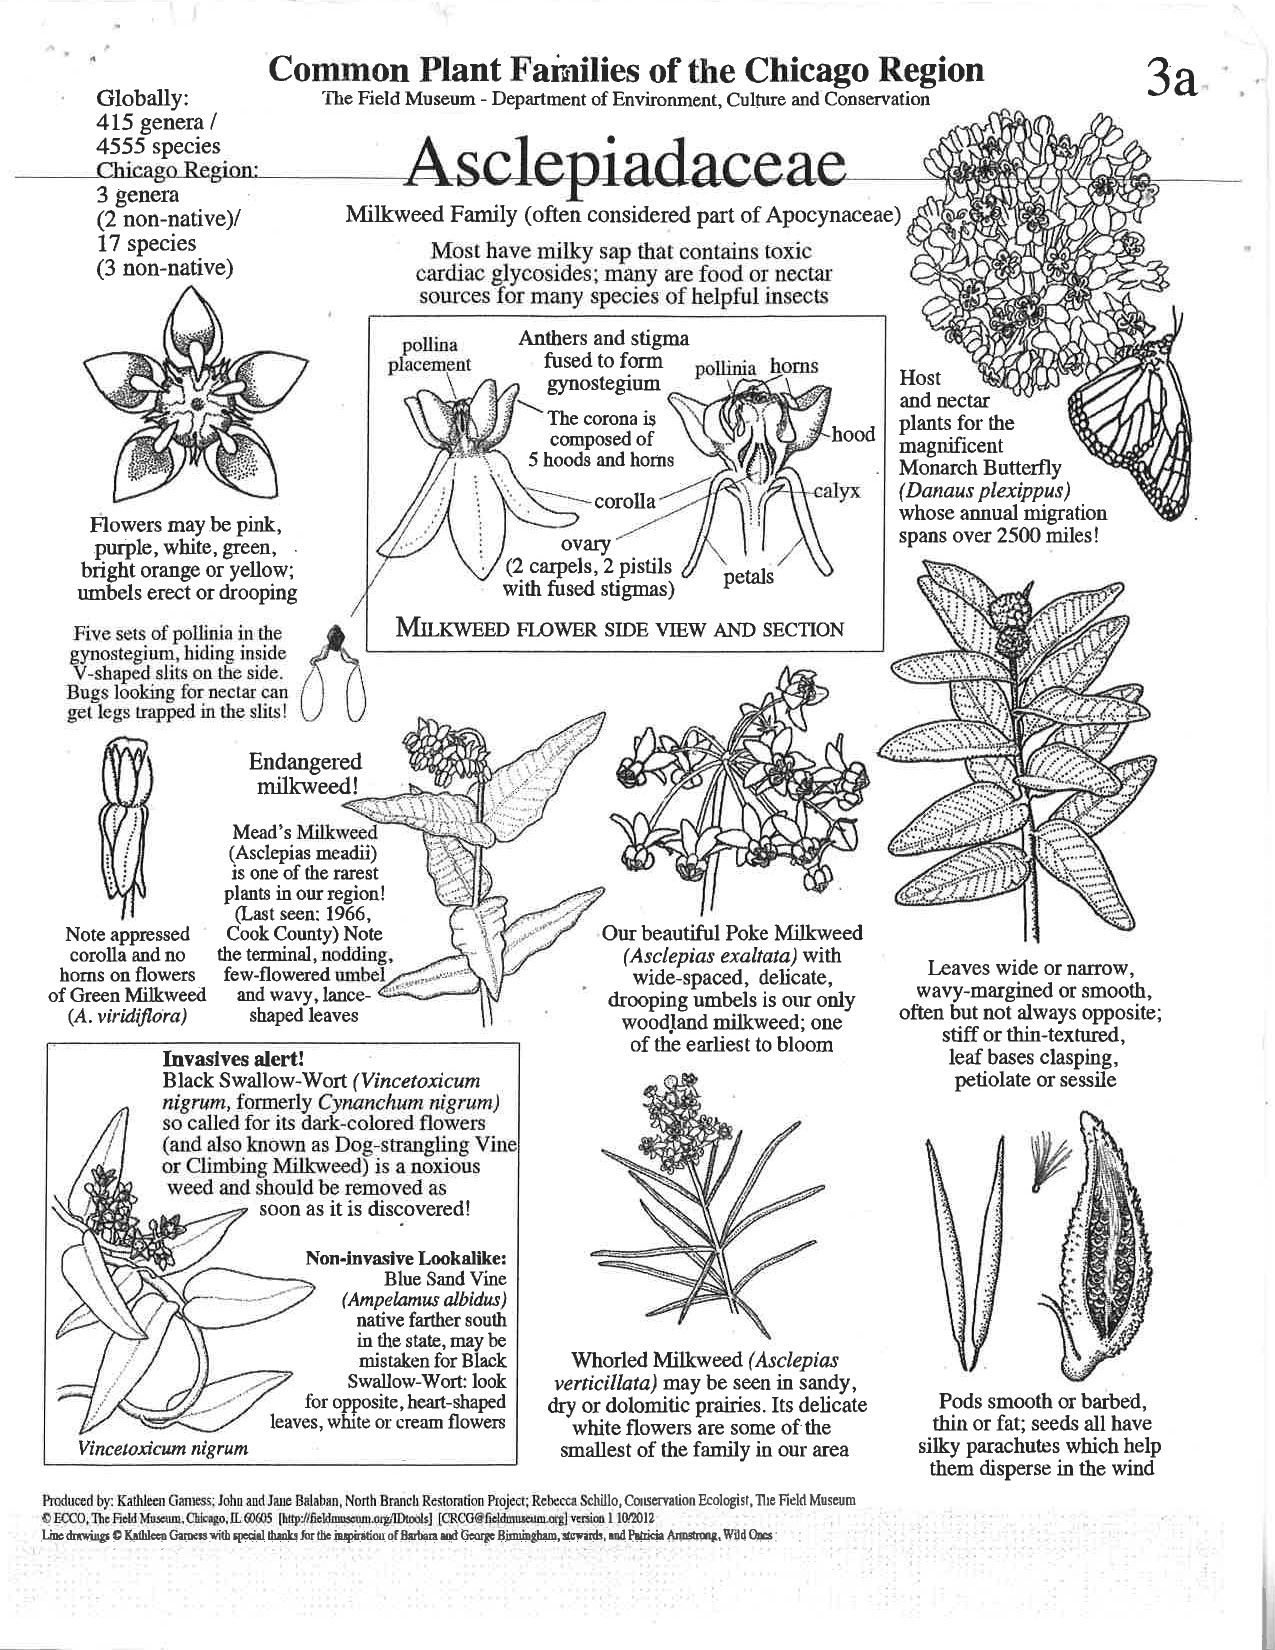 Poster of Common Plant Families of the Chicago Region